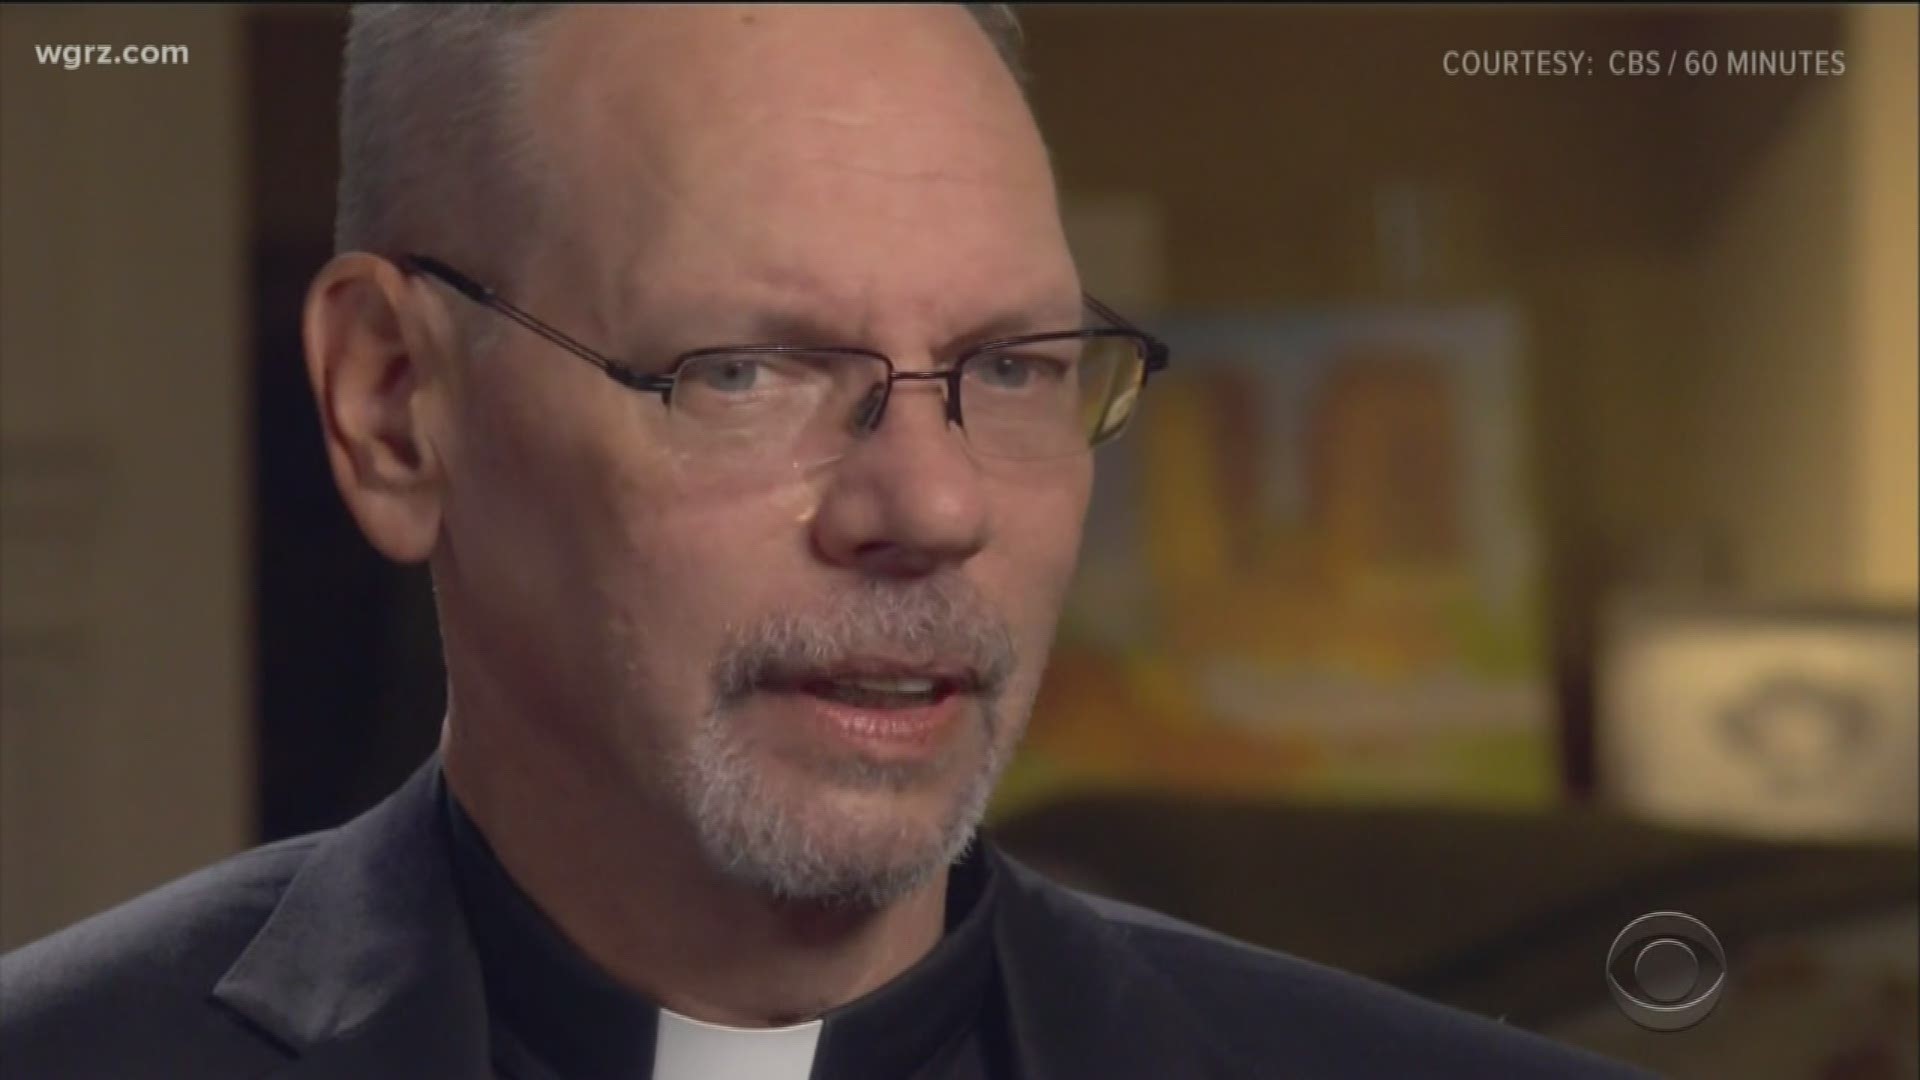 Buffalo Priests are calling for Bishop Malone to resign.